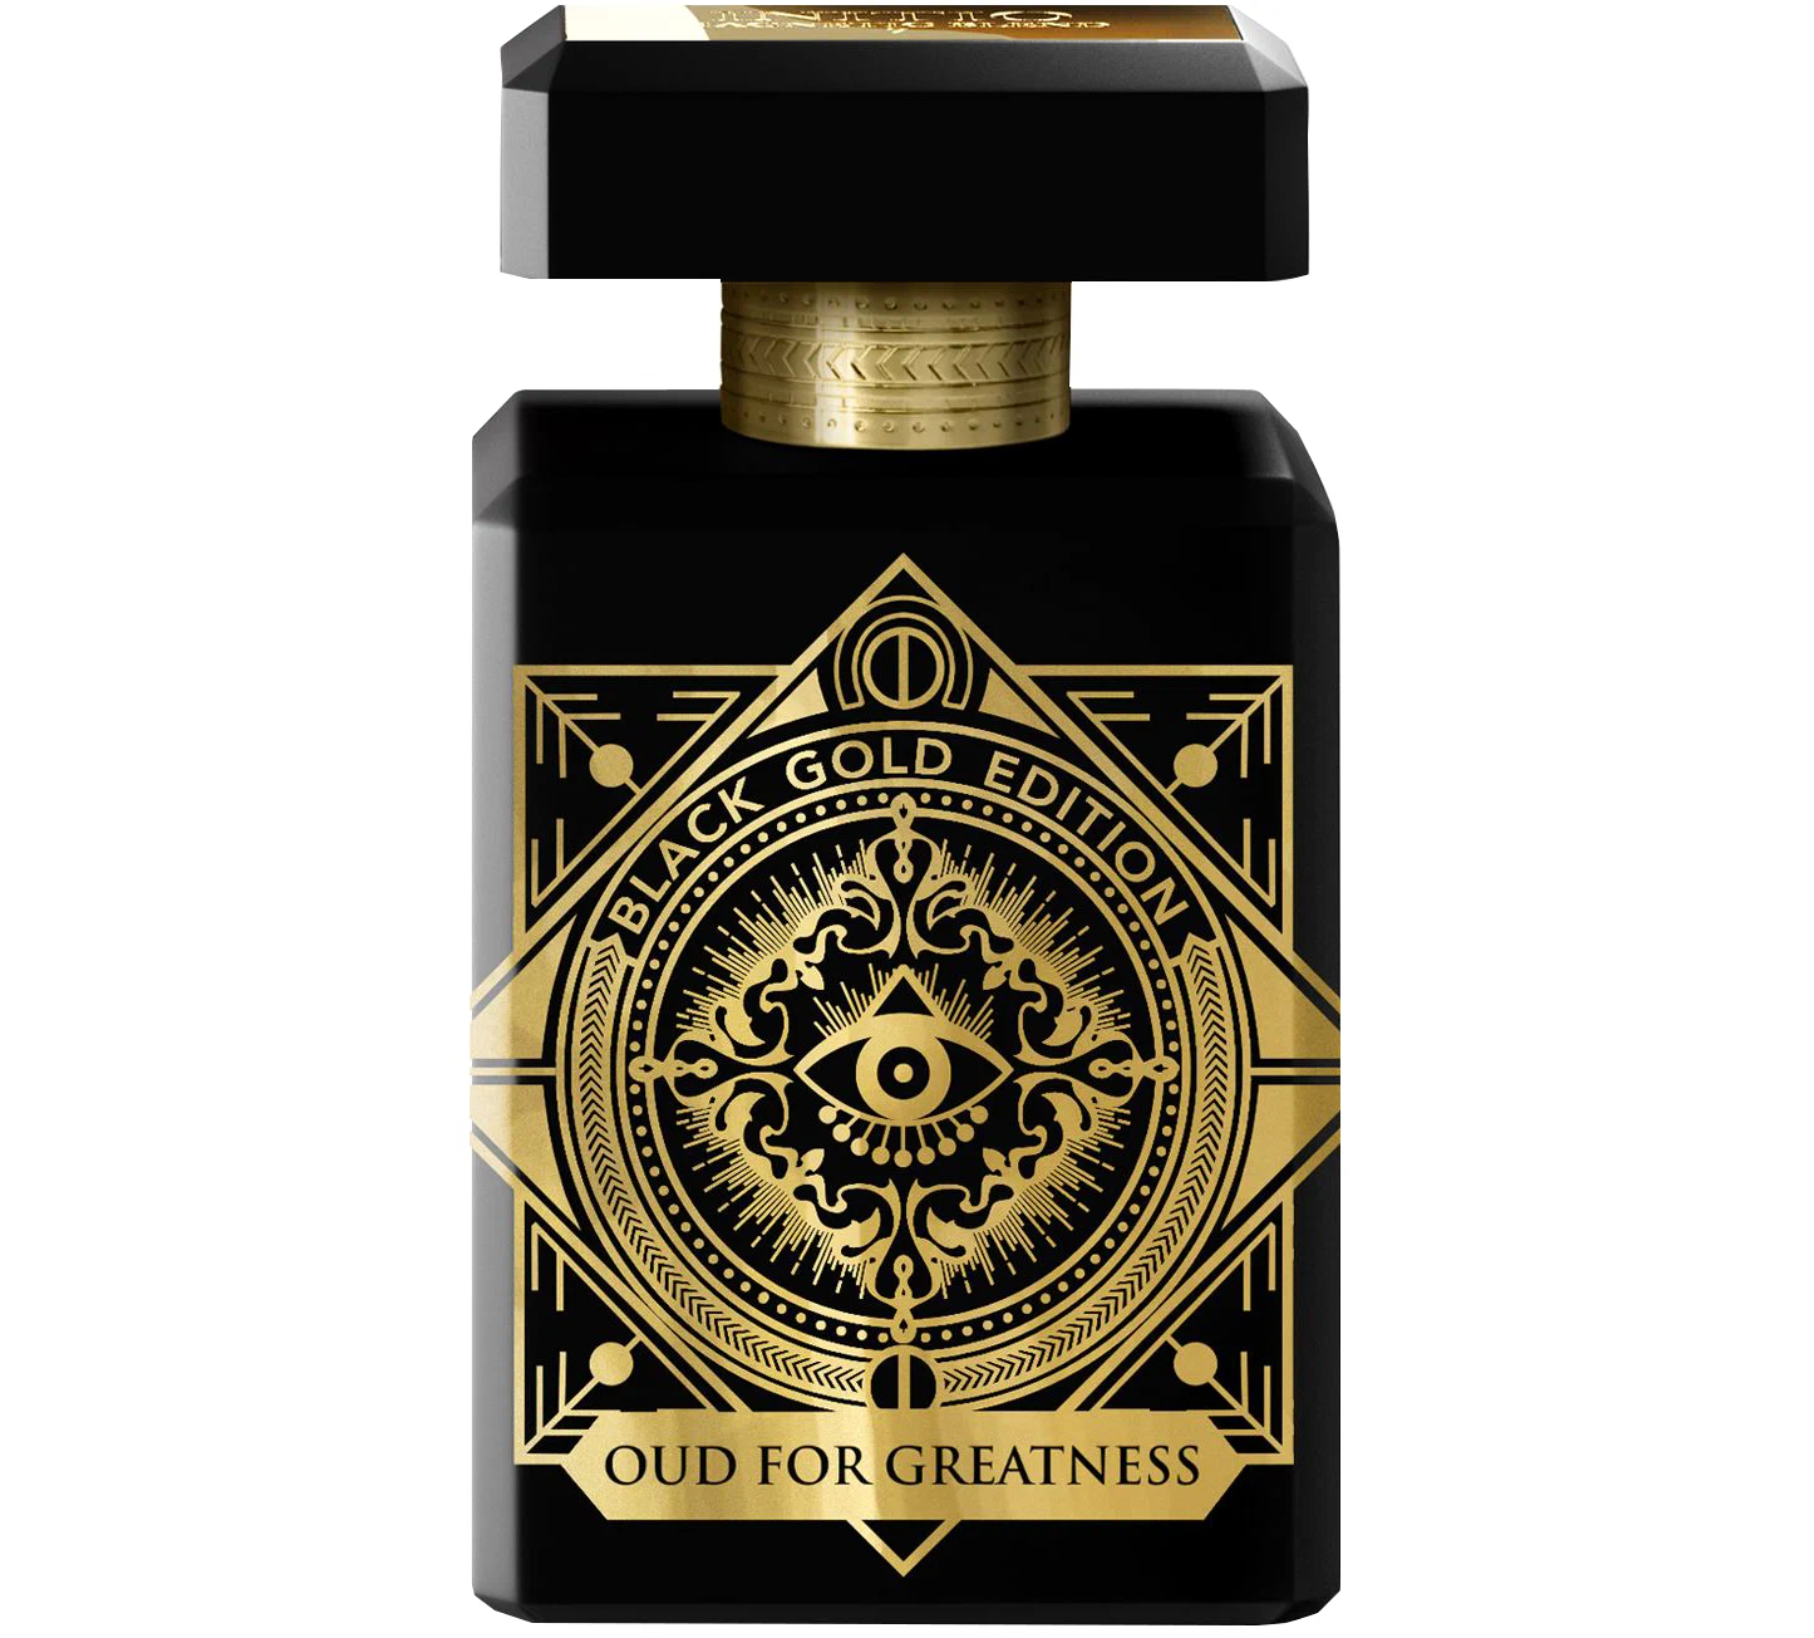 Initio Parfums Prives парфюмерная вода Oud for Greatness, 90 мл